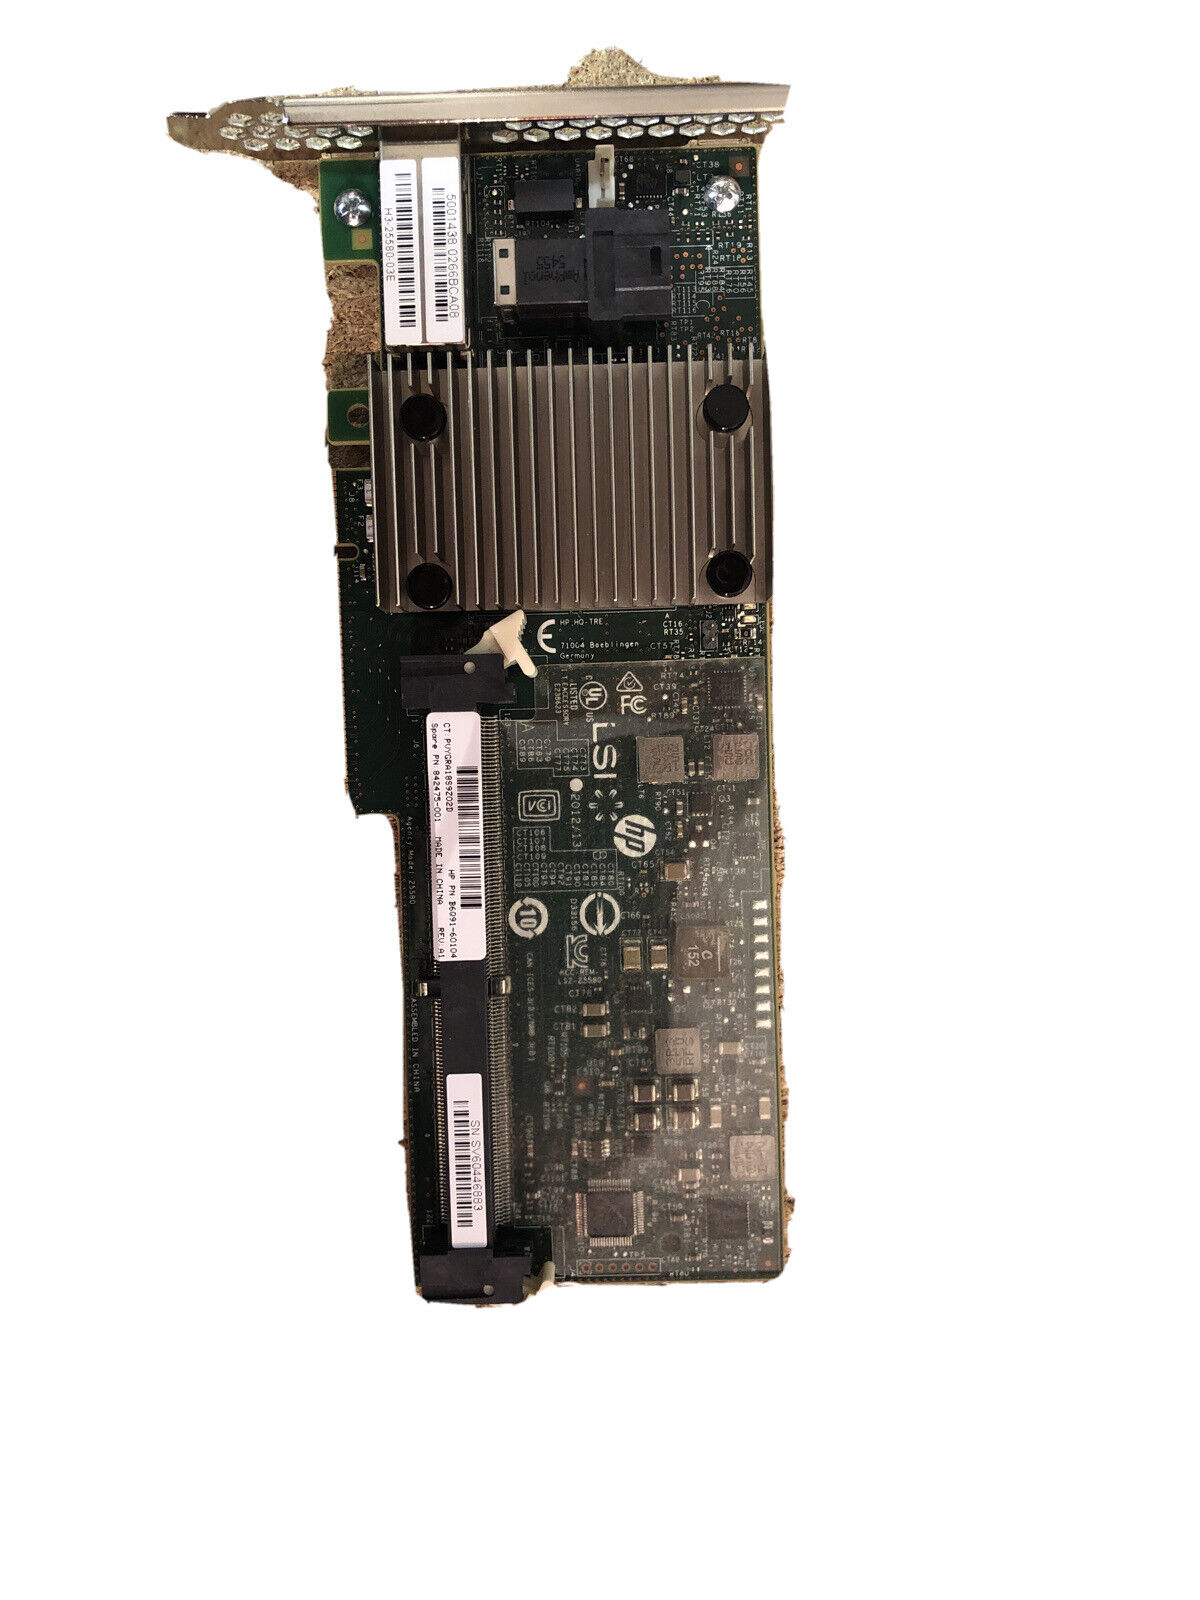 842475-001 - HP - PCA 4E / 4I PCI-E X8 NETWORK CARD FOR HPE STOREONCE